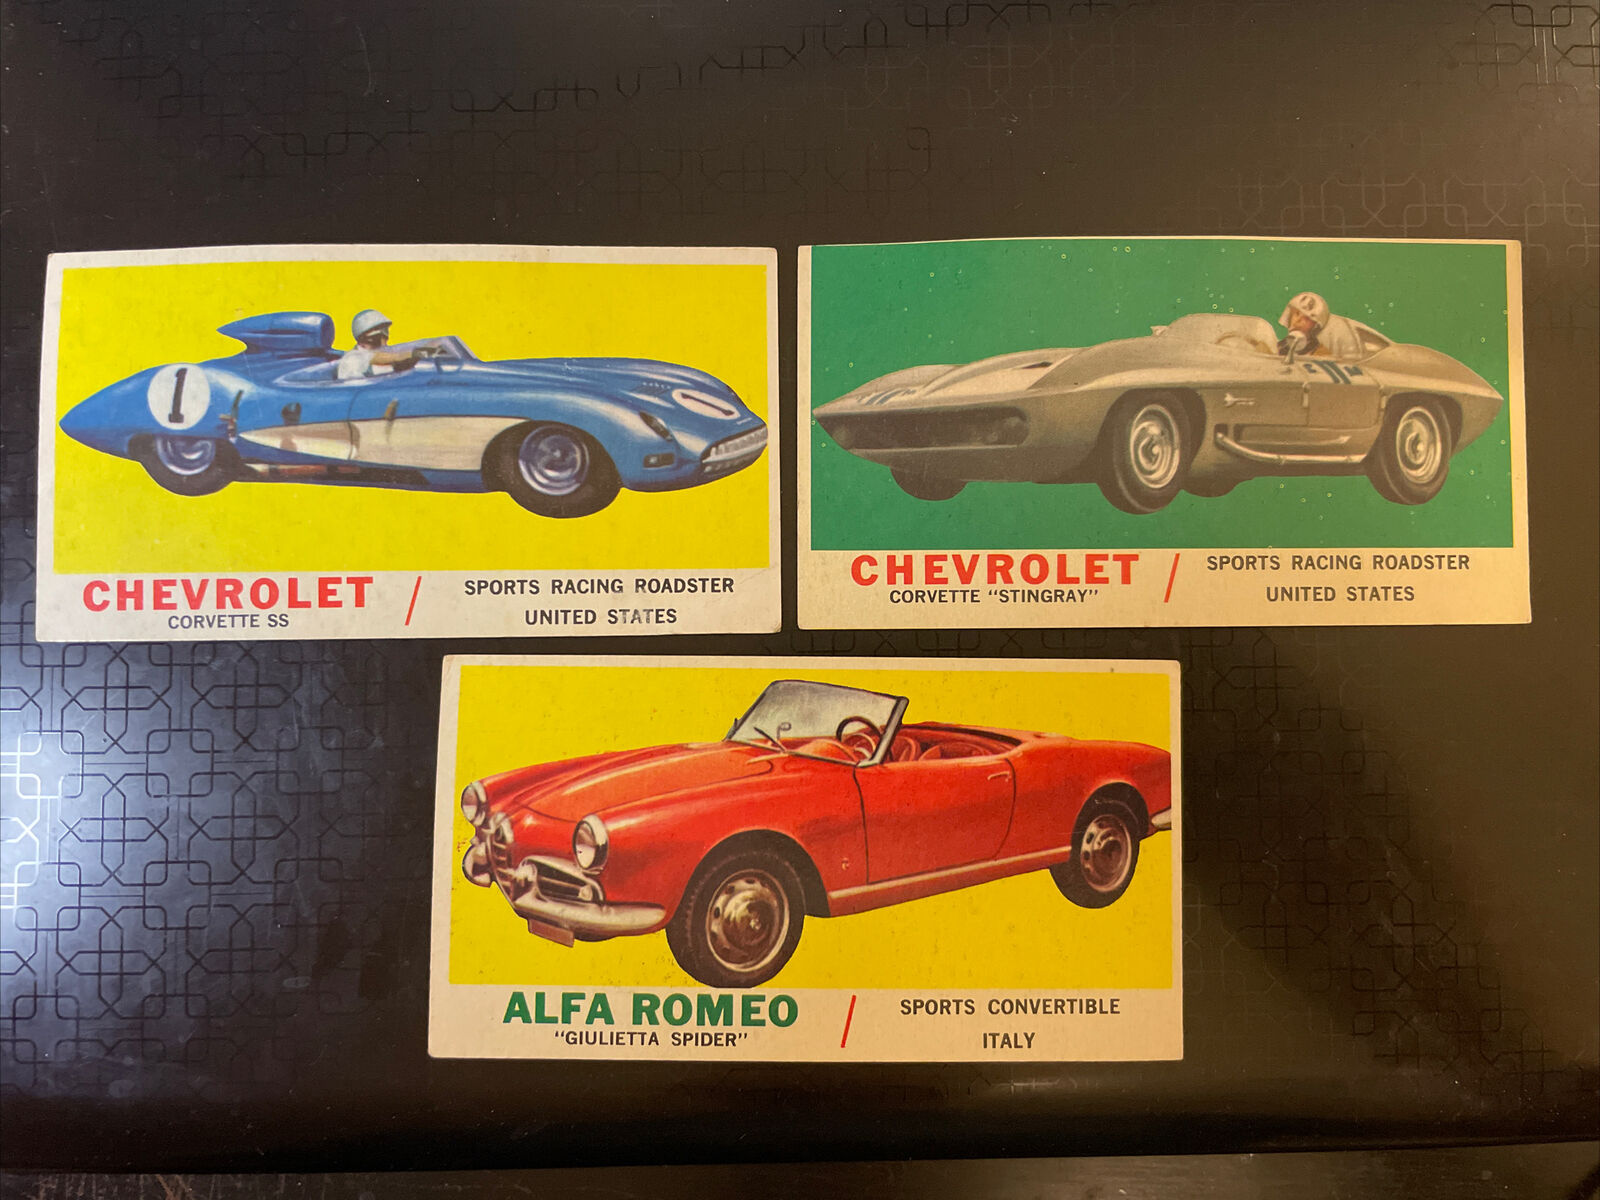 1961 TOPPS SPORTS CARS LOT OF 3 AUTOMOBILE TRADING CARDS VINTAGE